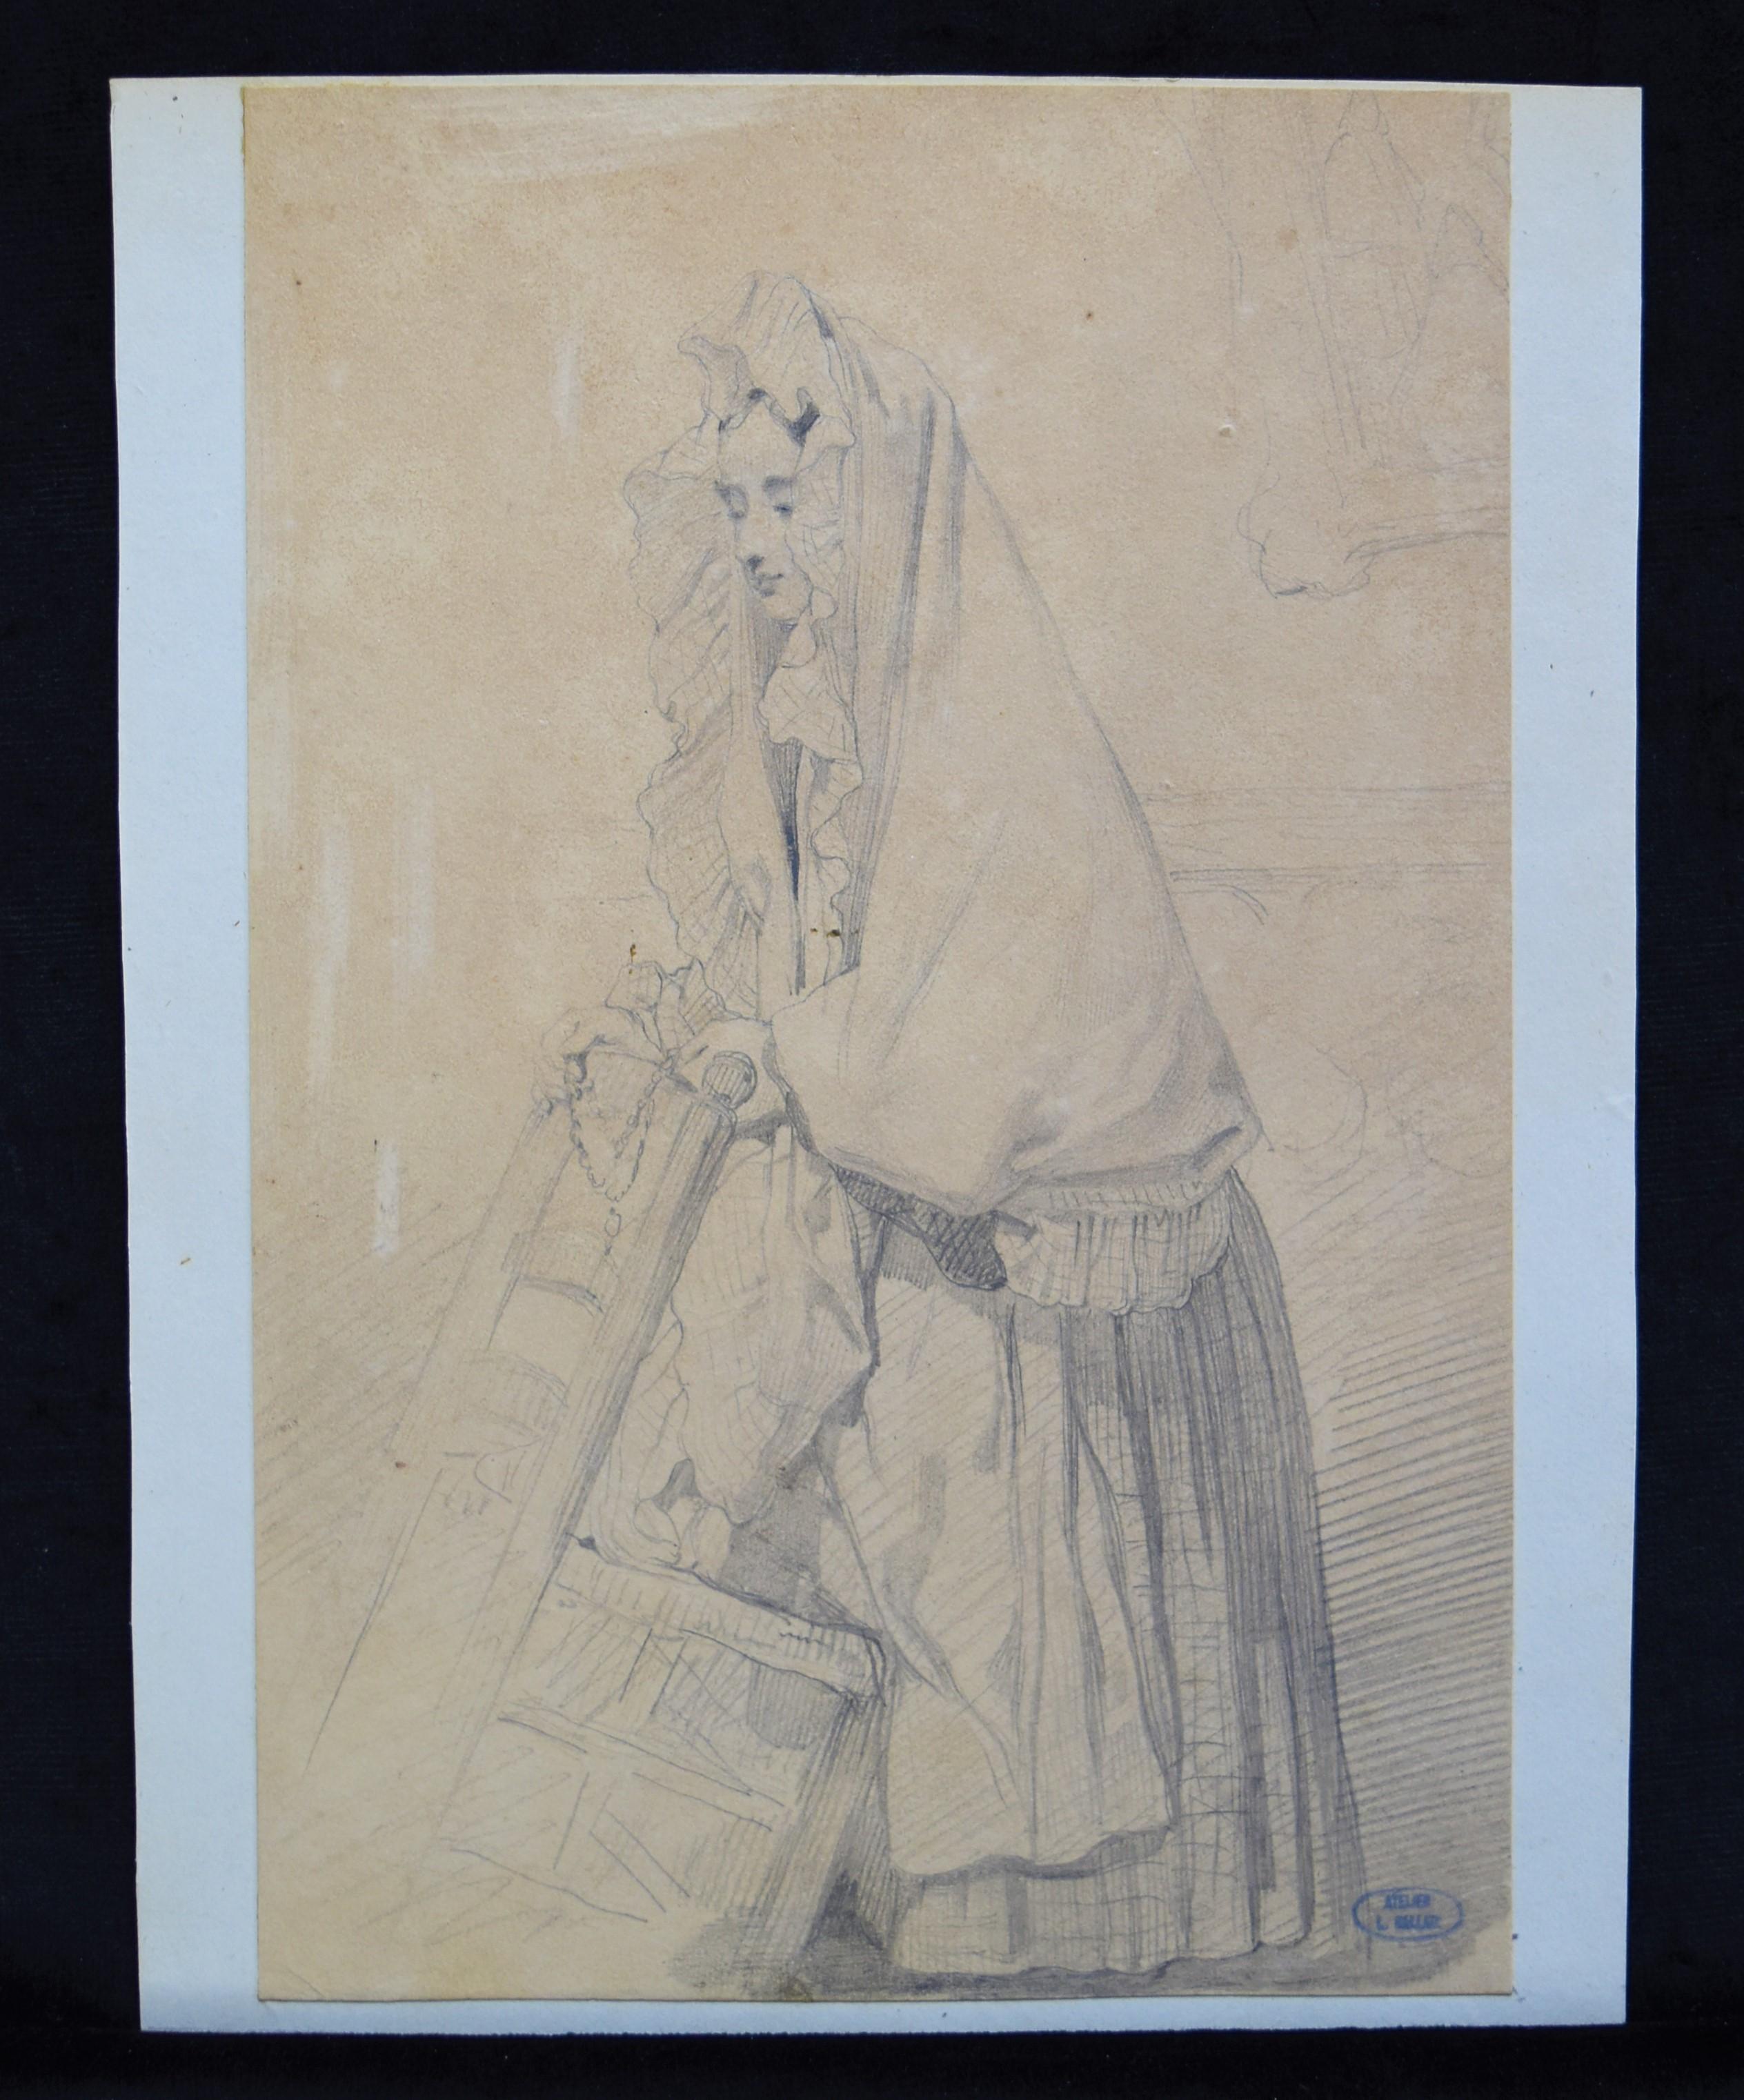 Louis Gallait (1810-1885)
A young girl in prayer, study
Lead mine on paper,  
26 x 17 cm
Stamp of the Louis Gallait Estate on the lower right
In quite good condition, traces of rubbings in the left part as visible on the pictures, slightly